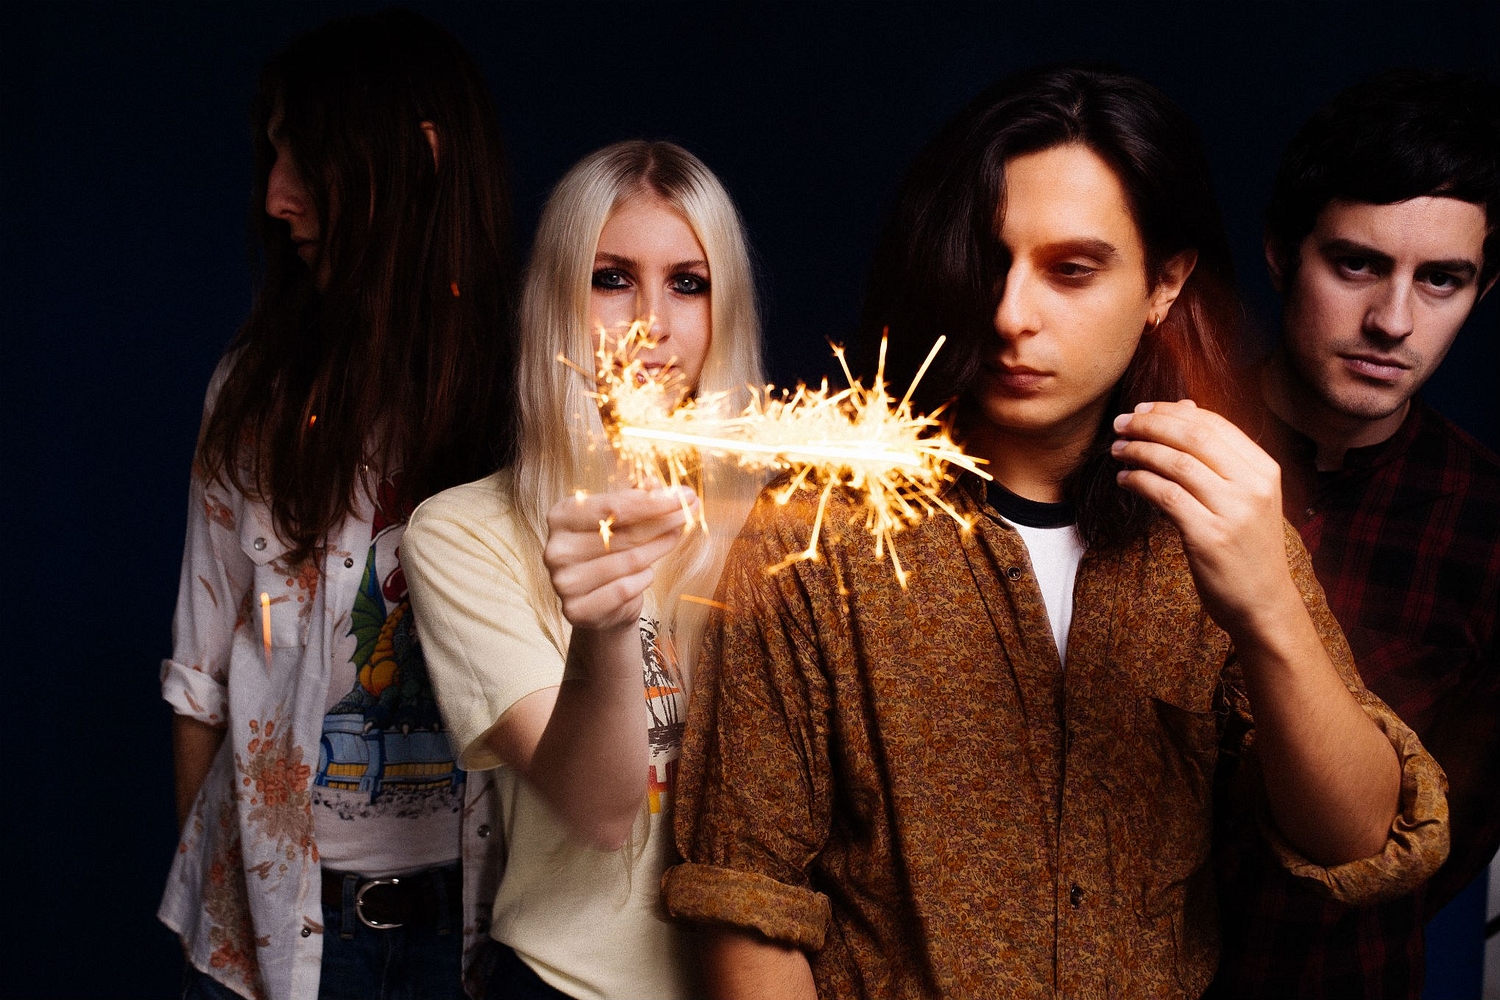 INHEAVEN: "We’ll hit the ground running in the new year"